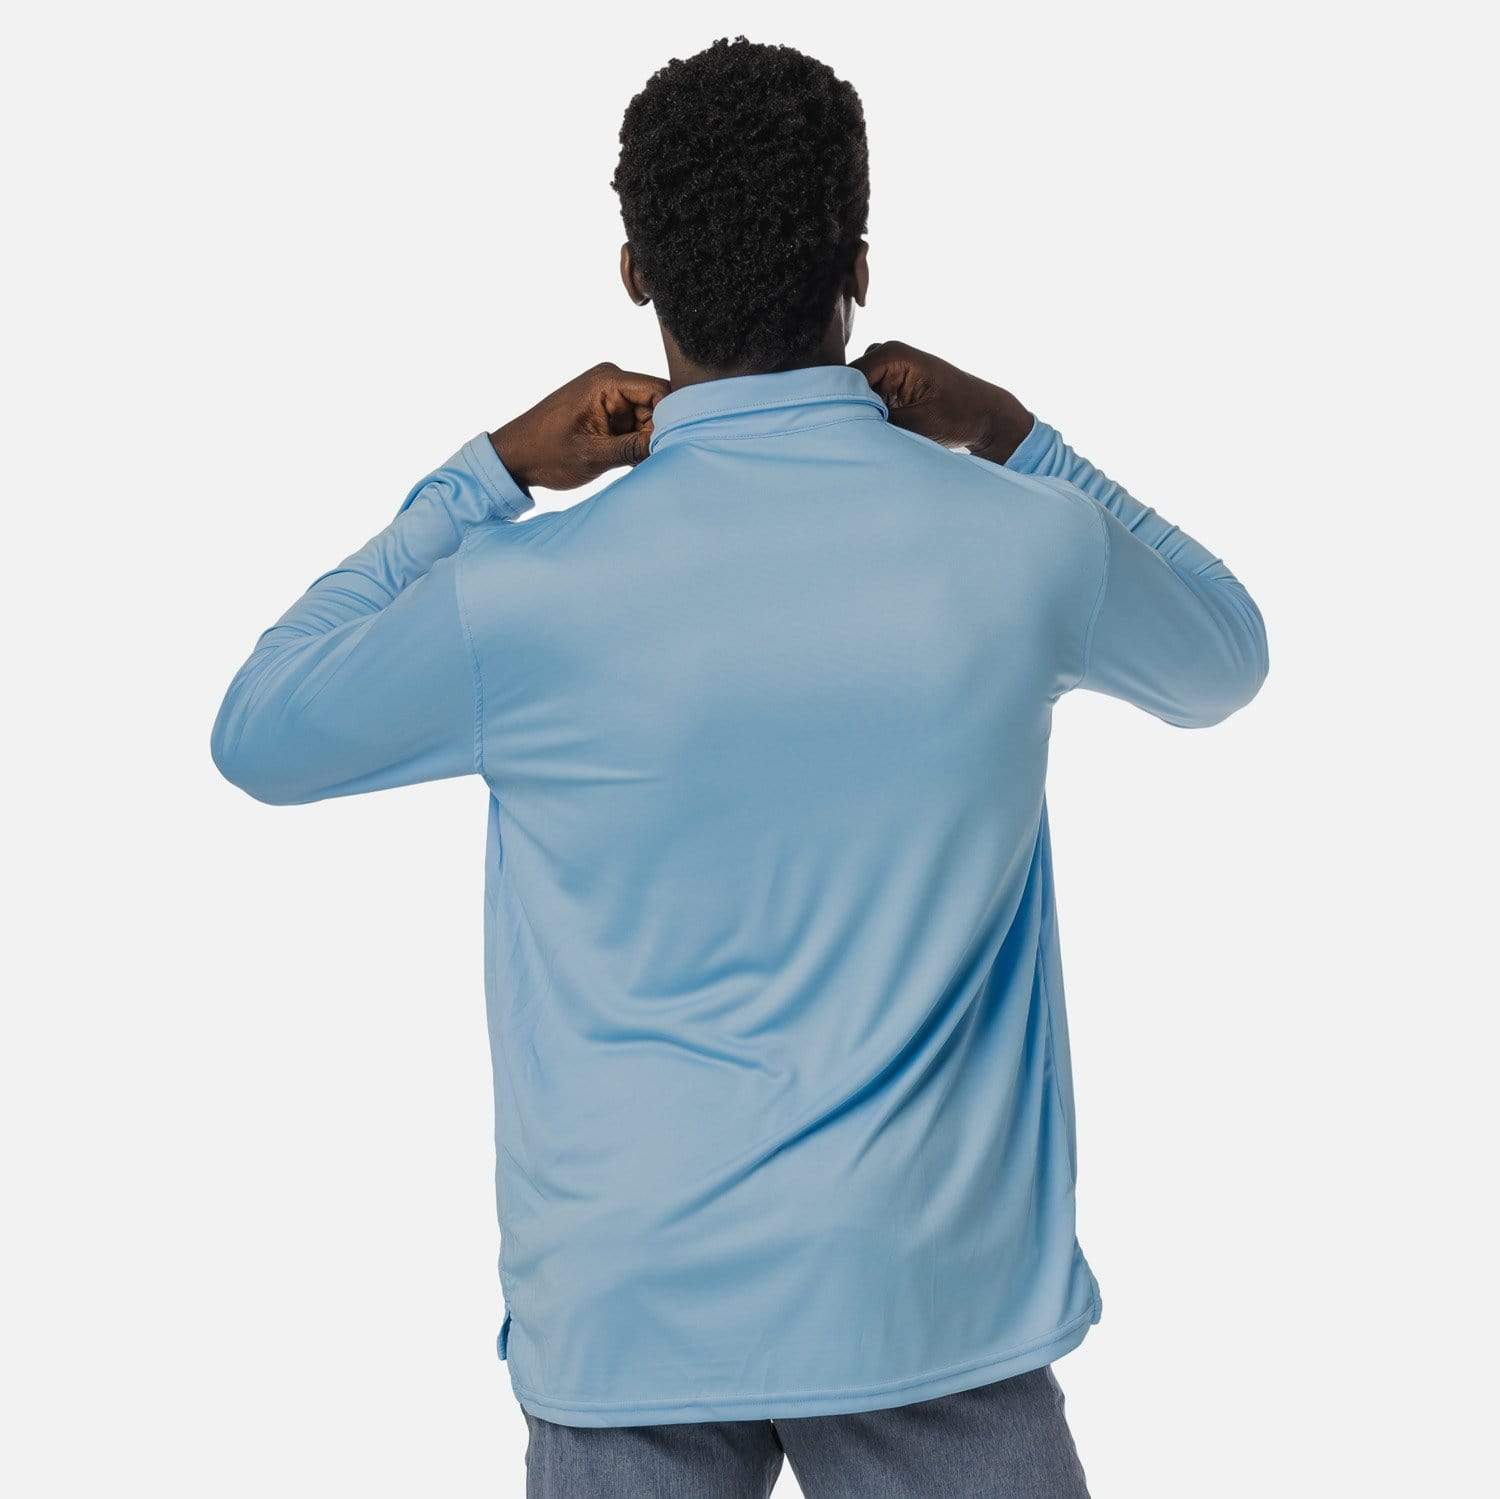 Why the long sleeve polo shirt for men is the unsung hero of sun